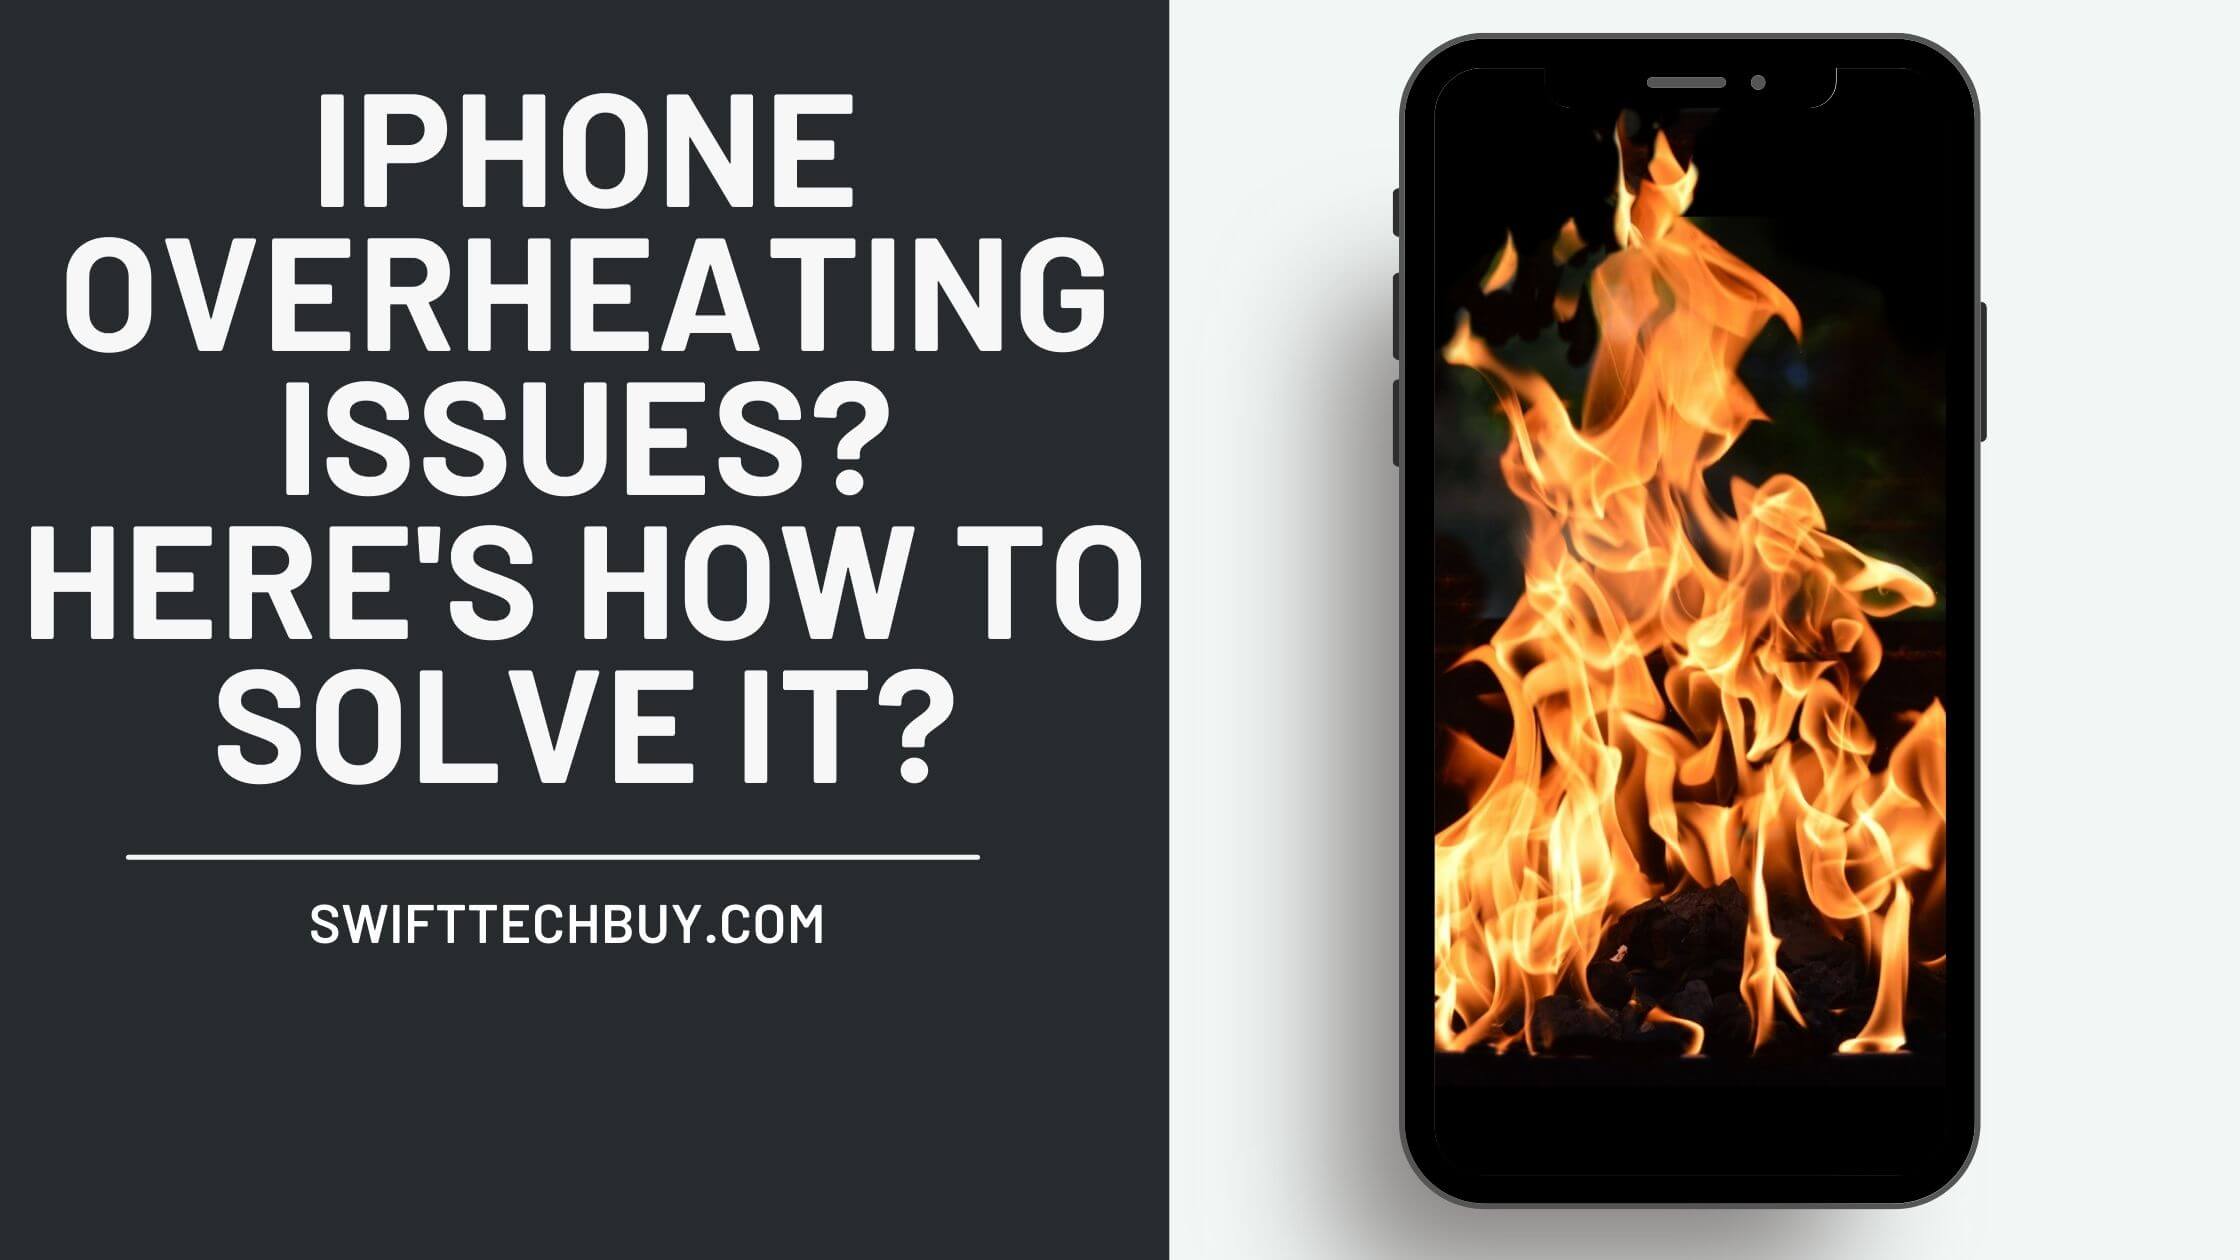 iPhone Overheating Issues? Here’s Why and What You Can Do About It